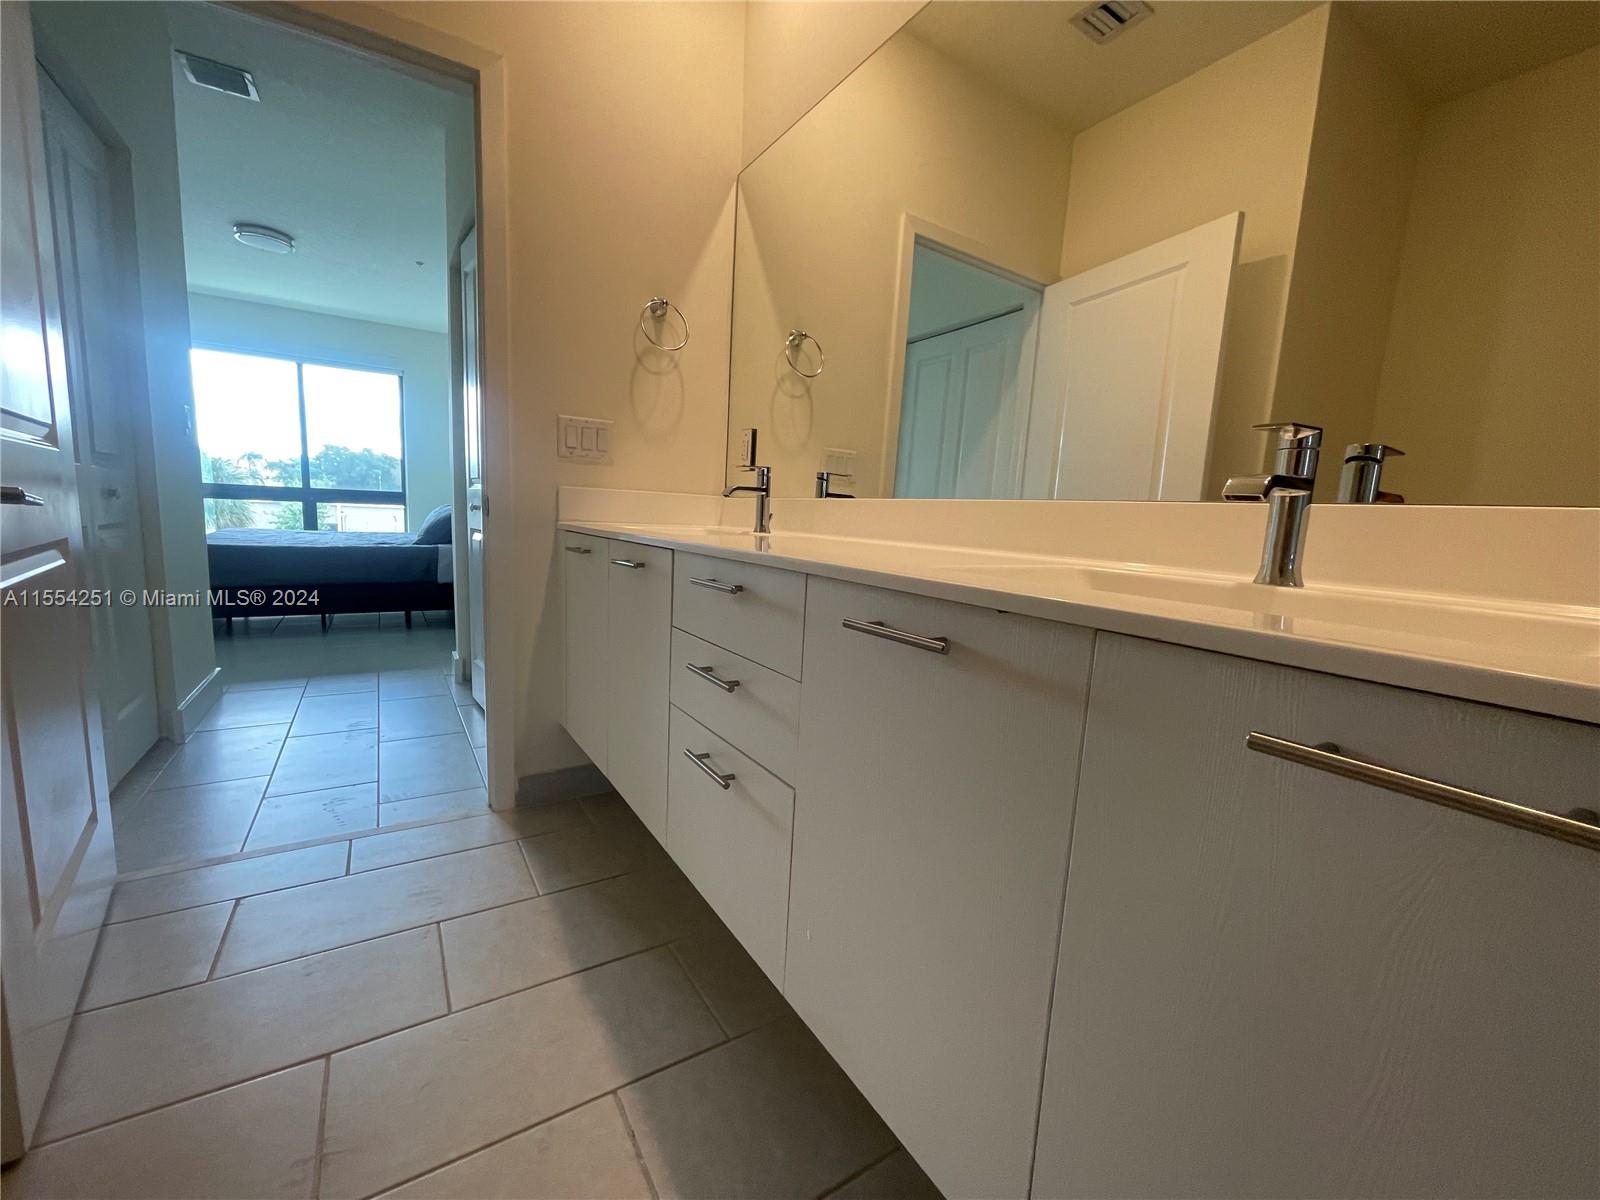 8167 NW 41st St E-203, Doral, Florida 33166, 3 Bedrooms Bedrooms, ,2 BathroomsBathrooms,Residentiallease,For Rent,8167 NW 41st St E-203,A11554251